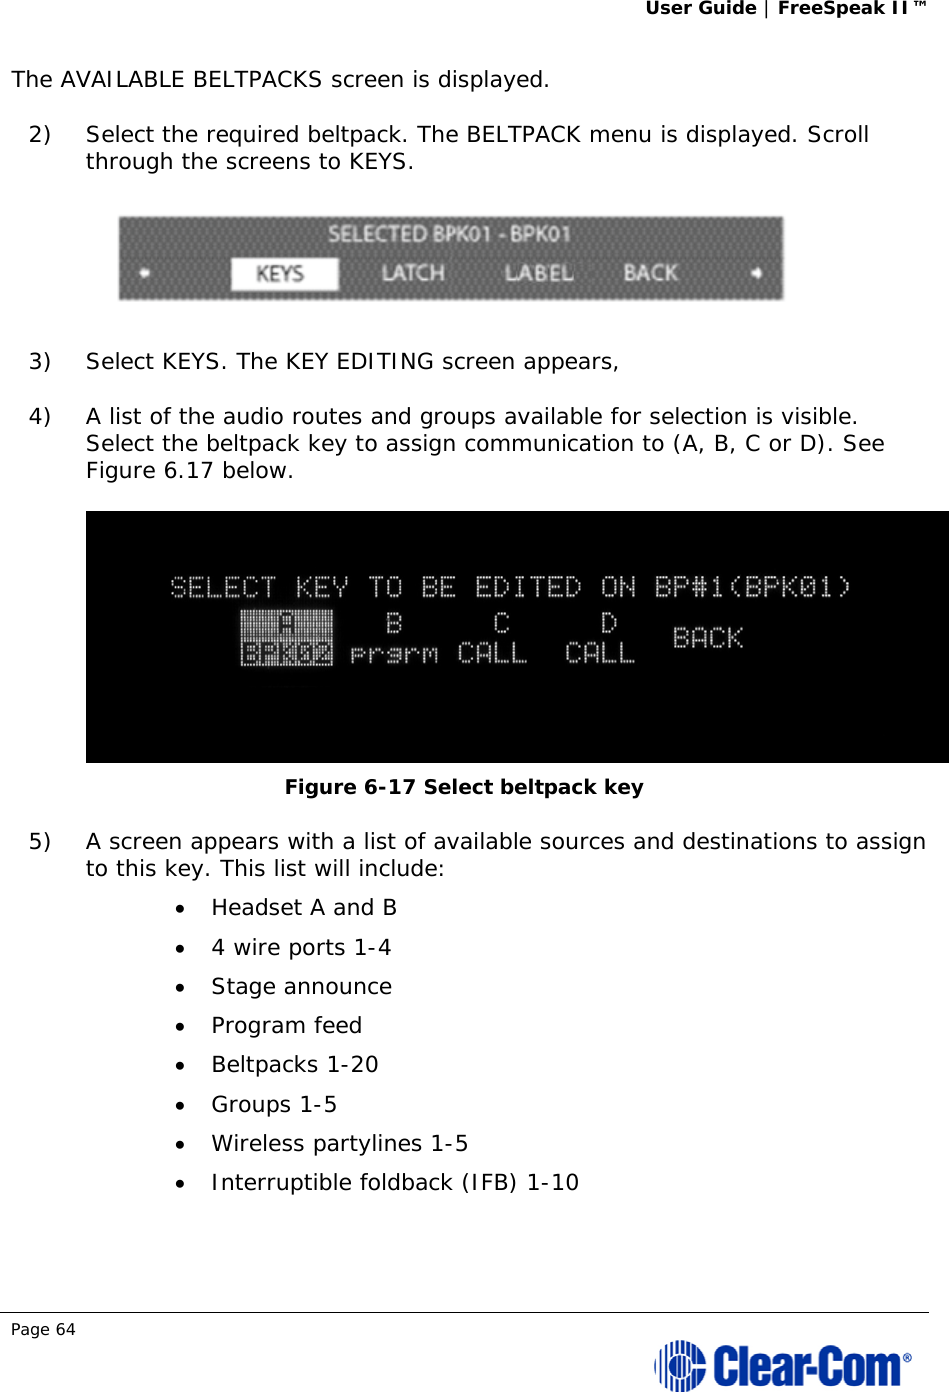 User Guide | FreeSpeak II™  Page 64  The AVAILABLE BELTPACKS screen is displayed. 2) Select the required beltpack. The BELTPACK menu is displayed. Scroll through the screens to KEYS.   3) Select KEYS. The KEY EDITING screen appears,  4) A list of the audio routes and groups available for selection is visible. Select the beltpack key to assign communication to (A, B, C or D). See Figure 6.17 below.  Figure 6-17 Select beltpack key 5) A screen appears with a list of available sources and destinations to assign to this key. This list will include:  Headset A and B  4 wire ports 1-4  Stage announce  Program feed  Beltpacks 1-20  Groups 1-5  Wireless partylines 1-5  Interruptible foldback (IFB) 1-10 